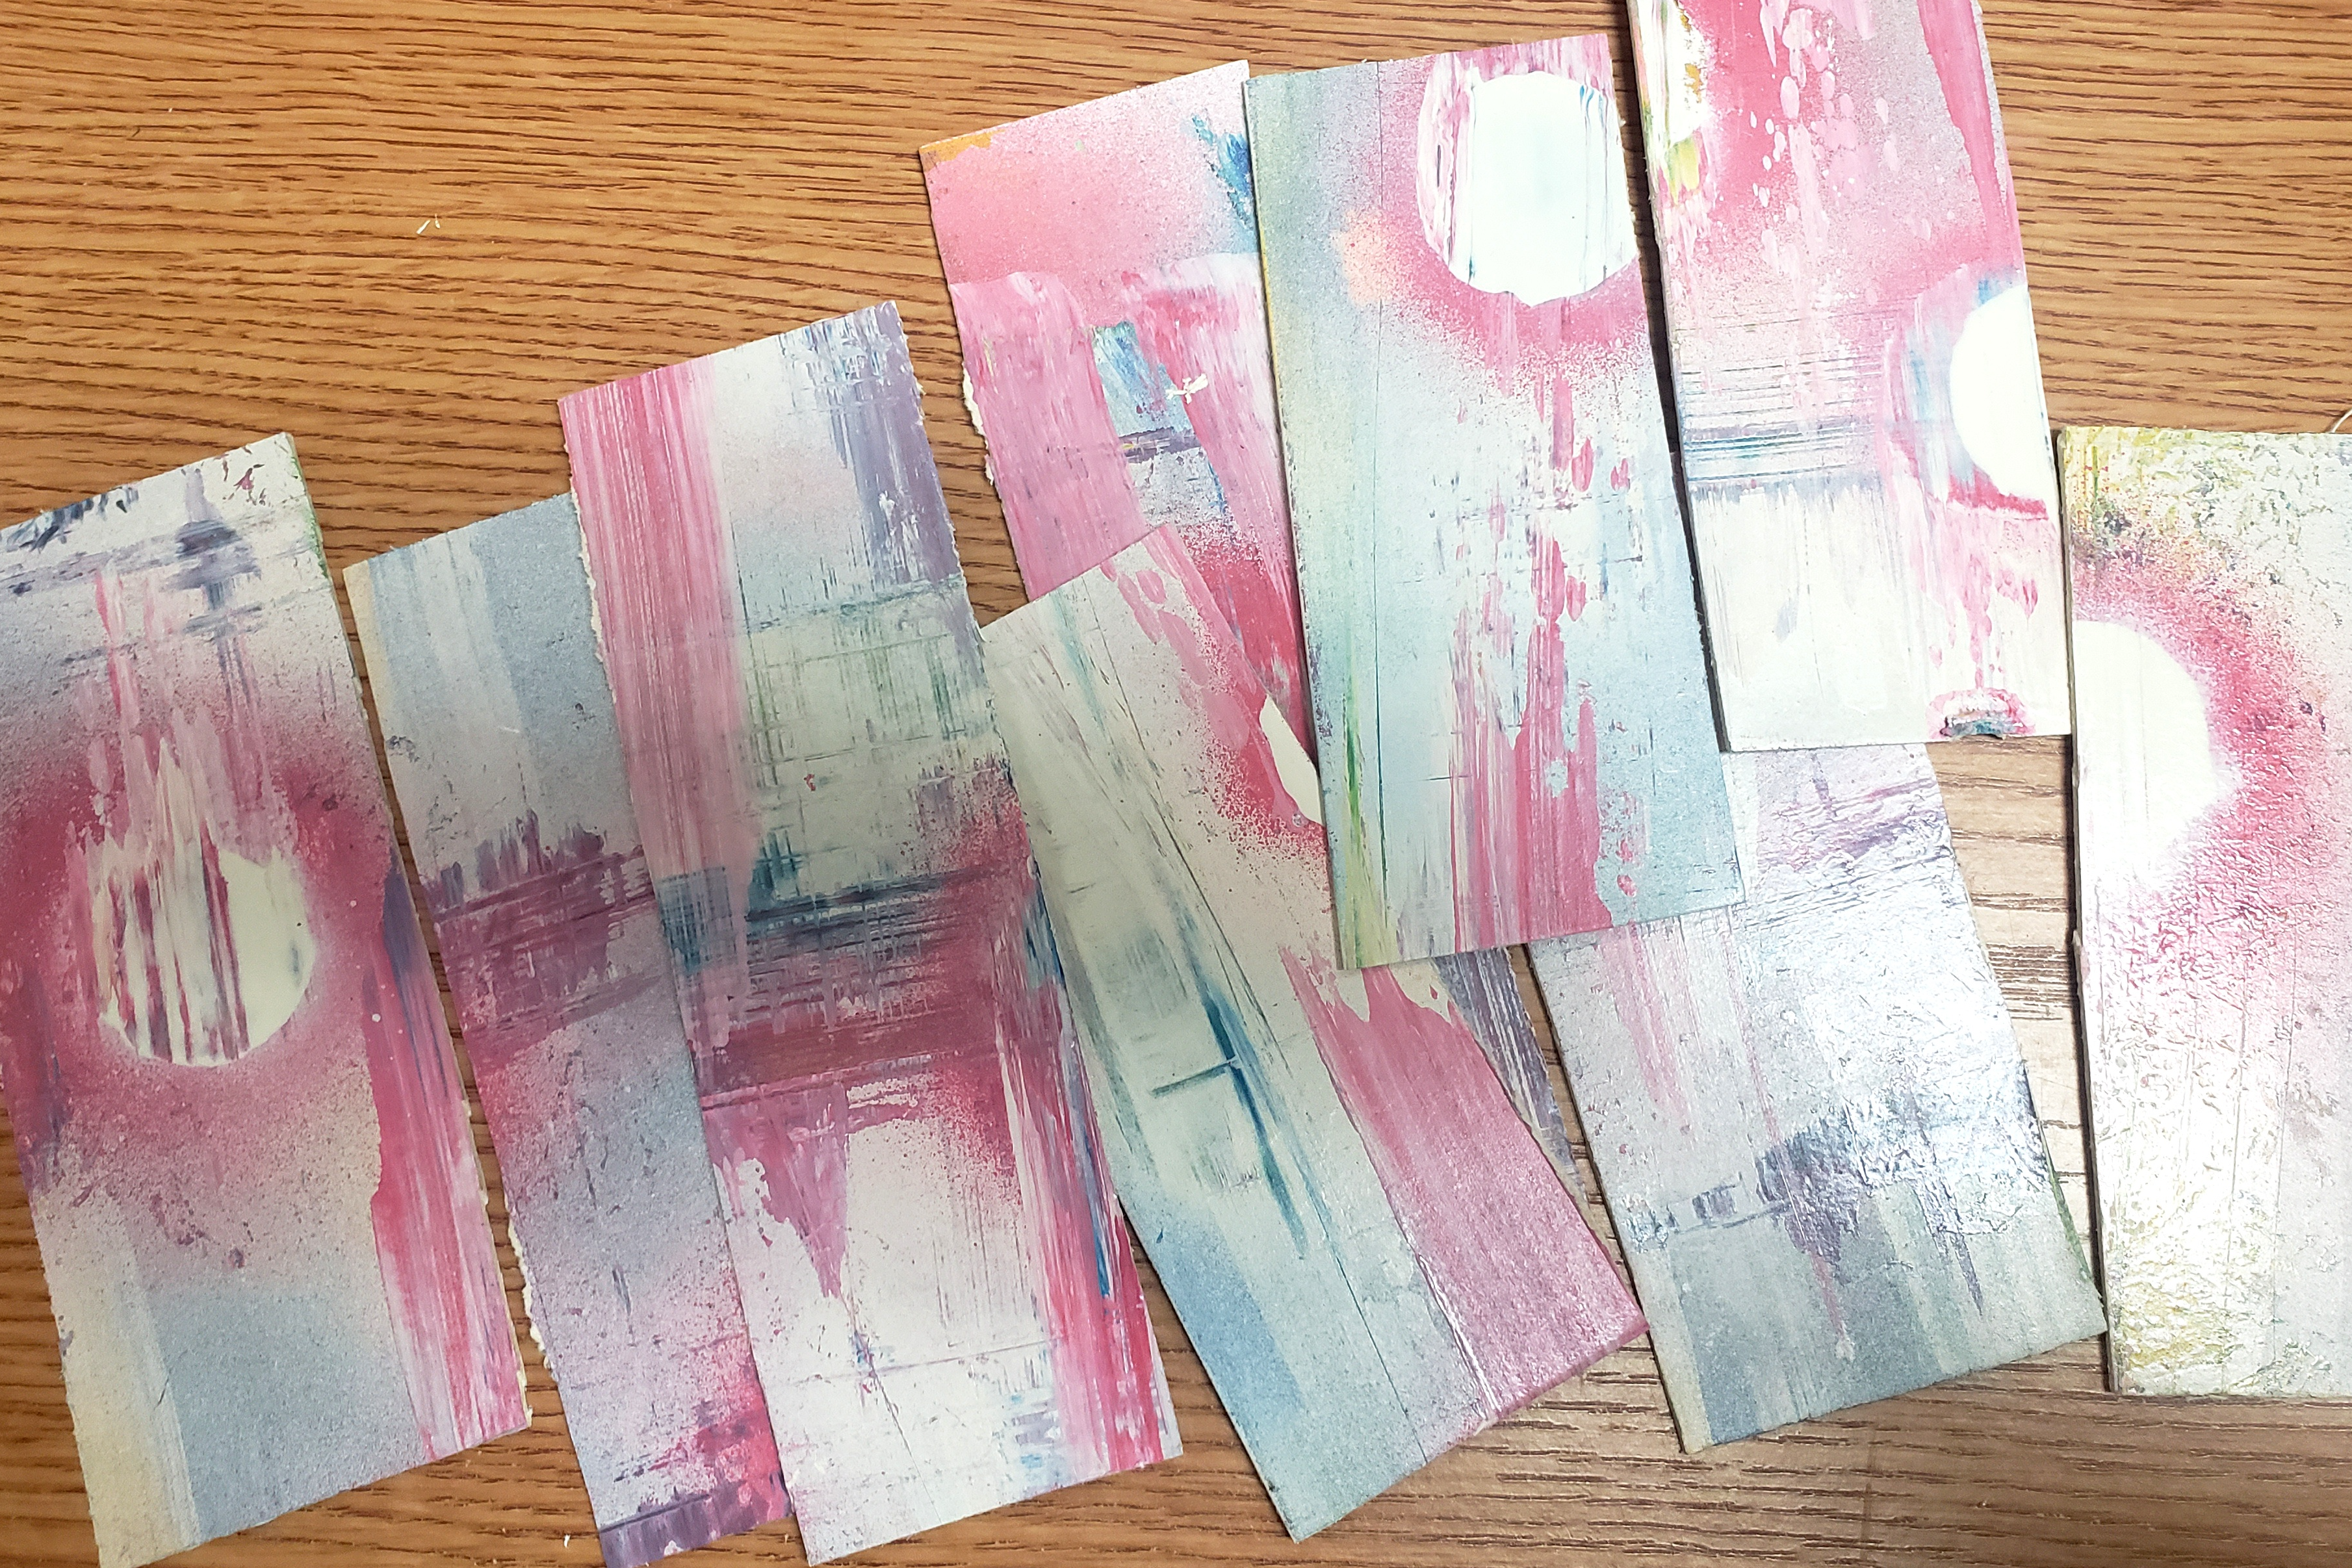 Local Artist donates abstract art bookmarks to Strawn Library!